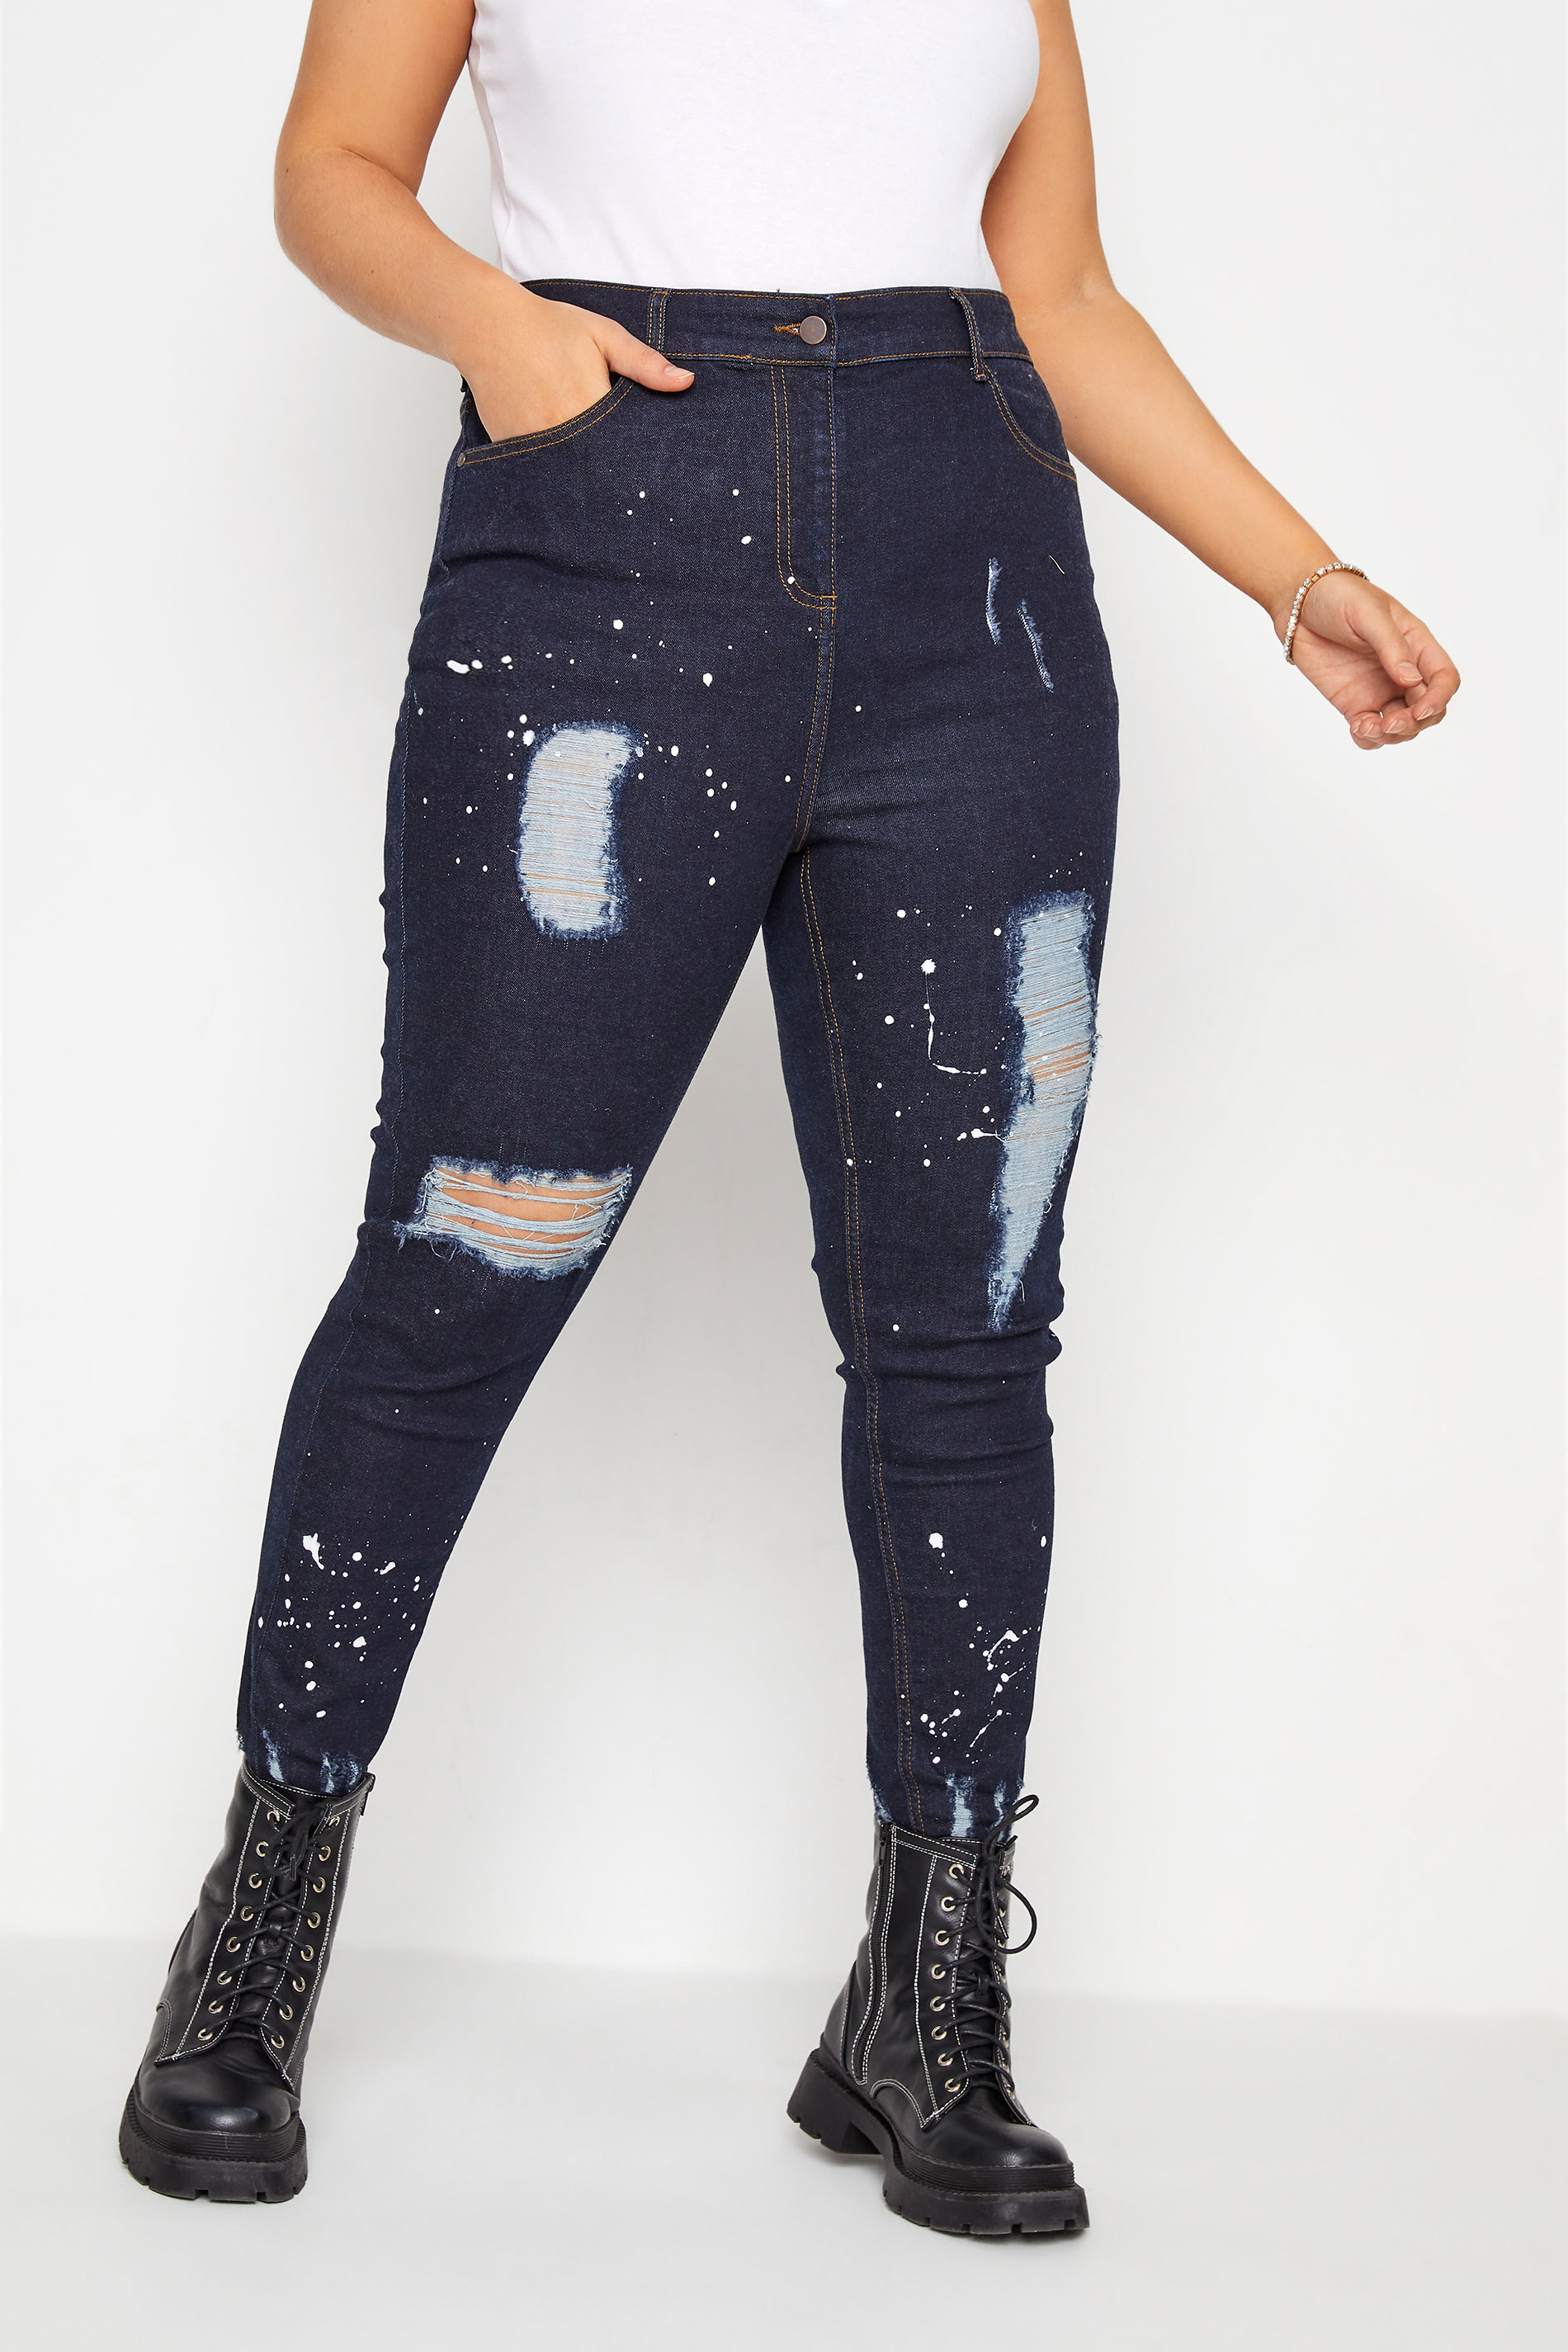 Blue Ripped Paint Skinny AVA Jeans_A.jpg